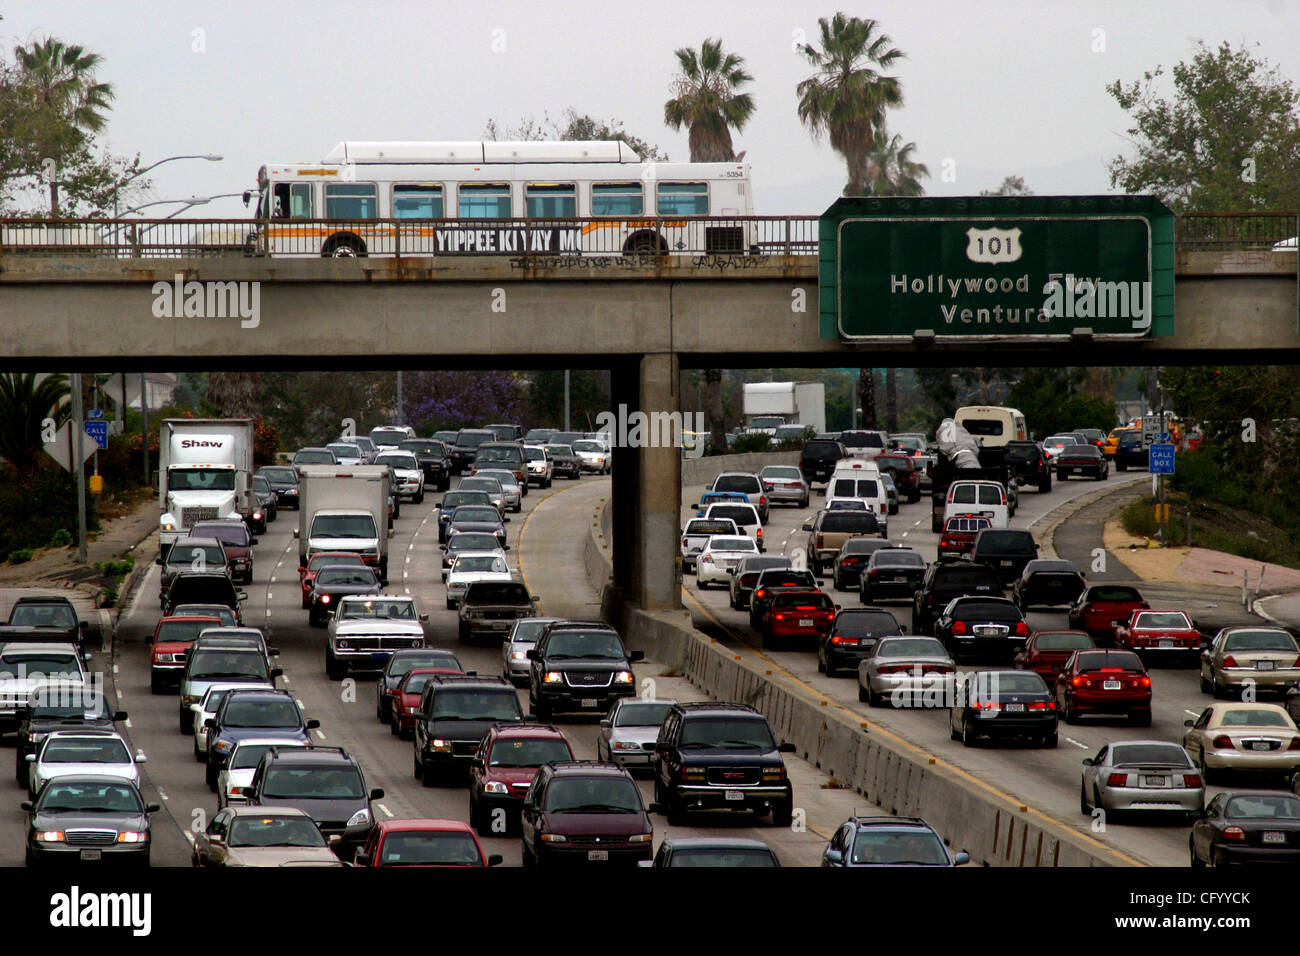 Jun 05, 2007; Los Angeles, CA, USA; A bus crosses a bridge as rush hour traffic backs up on the 101 freeway in downtown Los Angeles .The Metropolitan Transportation Authority board approved a moderate fare hike last month that will reduce the agency's structural budget deficit without gouging the lo Stock Photo